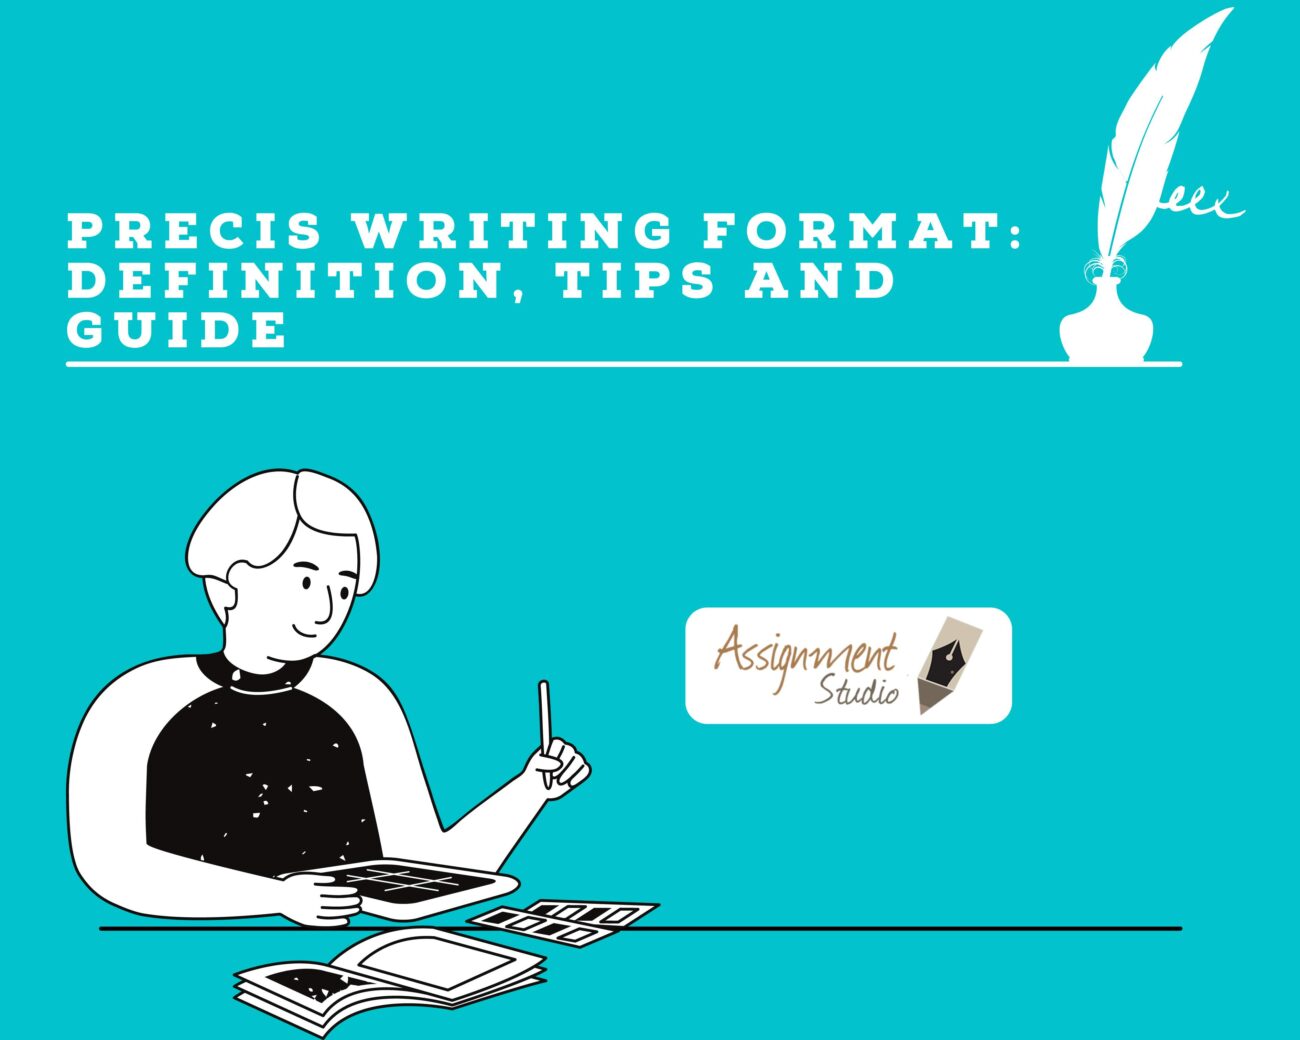 Precis Writing Format: Definition, tips and guide